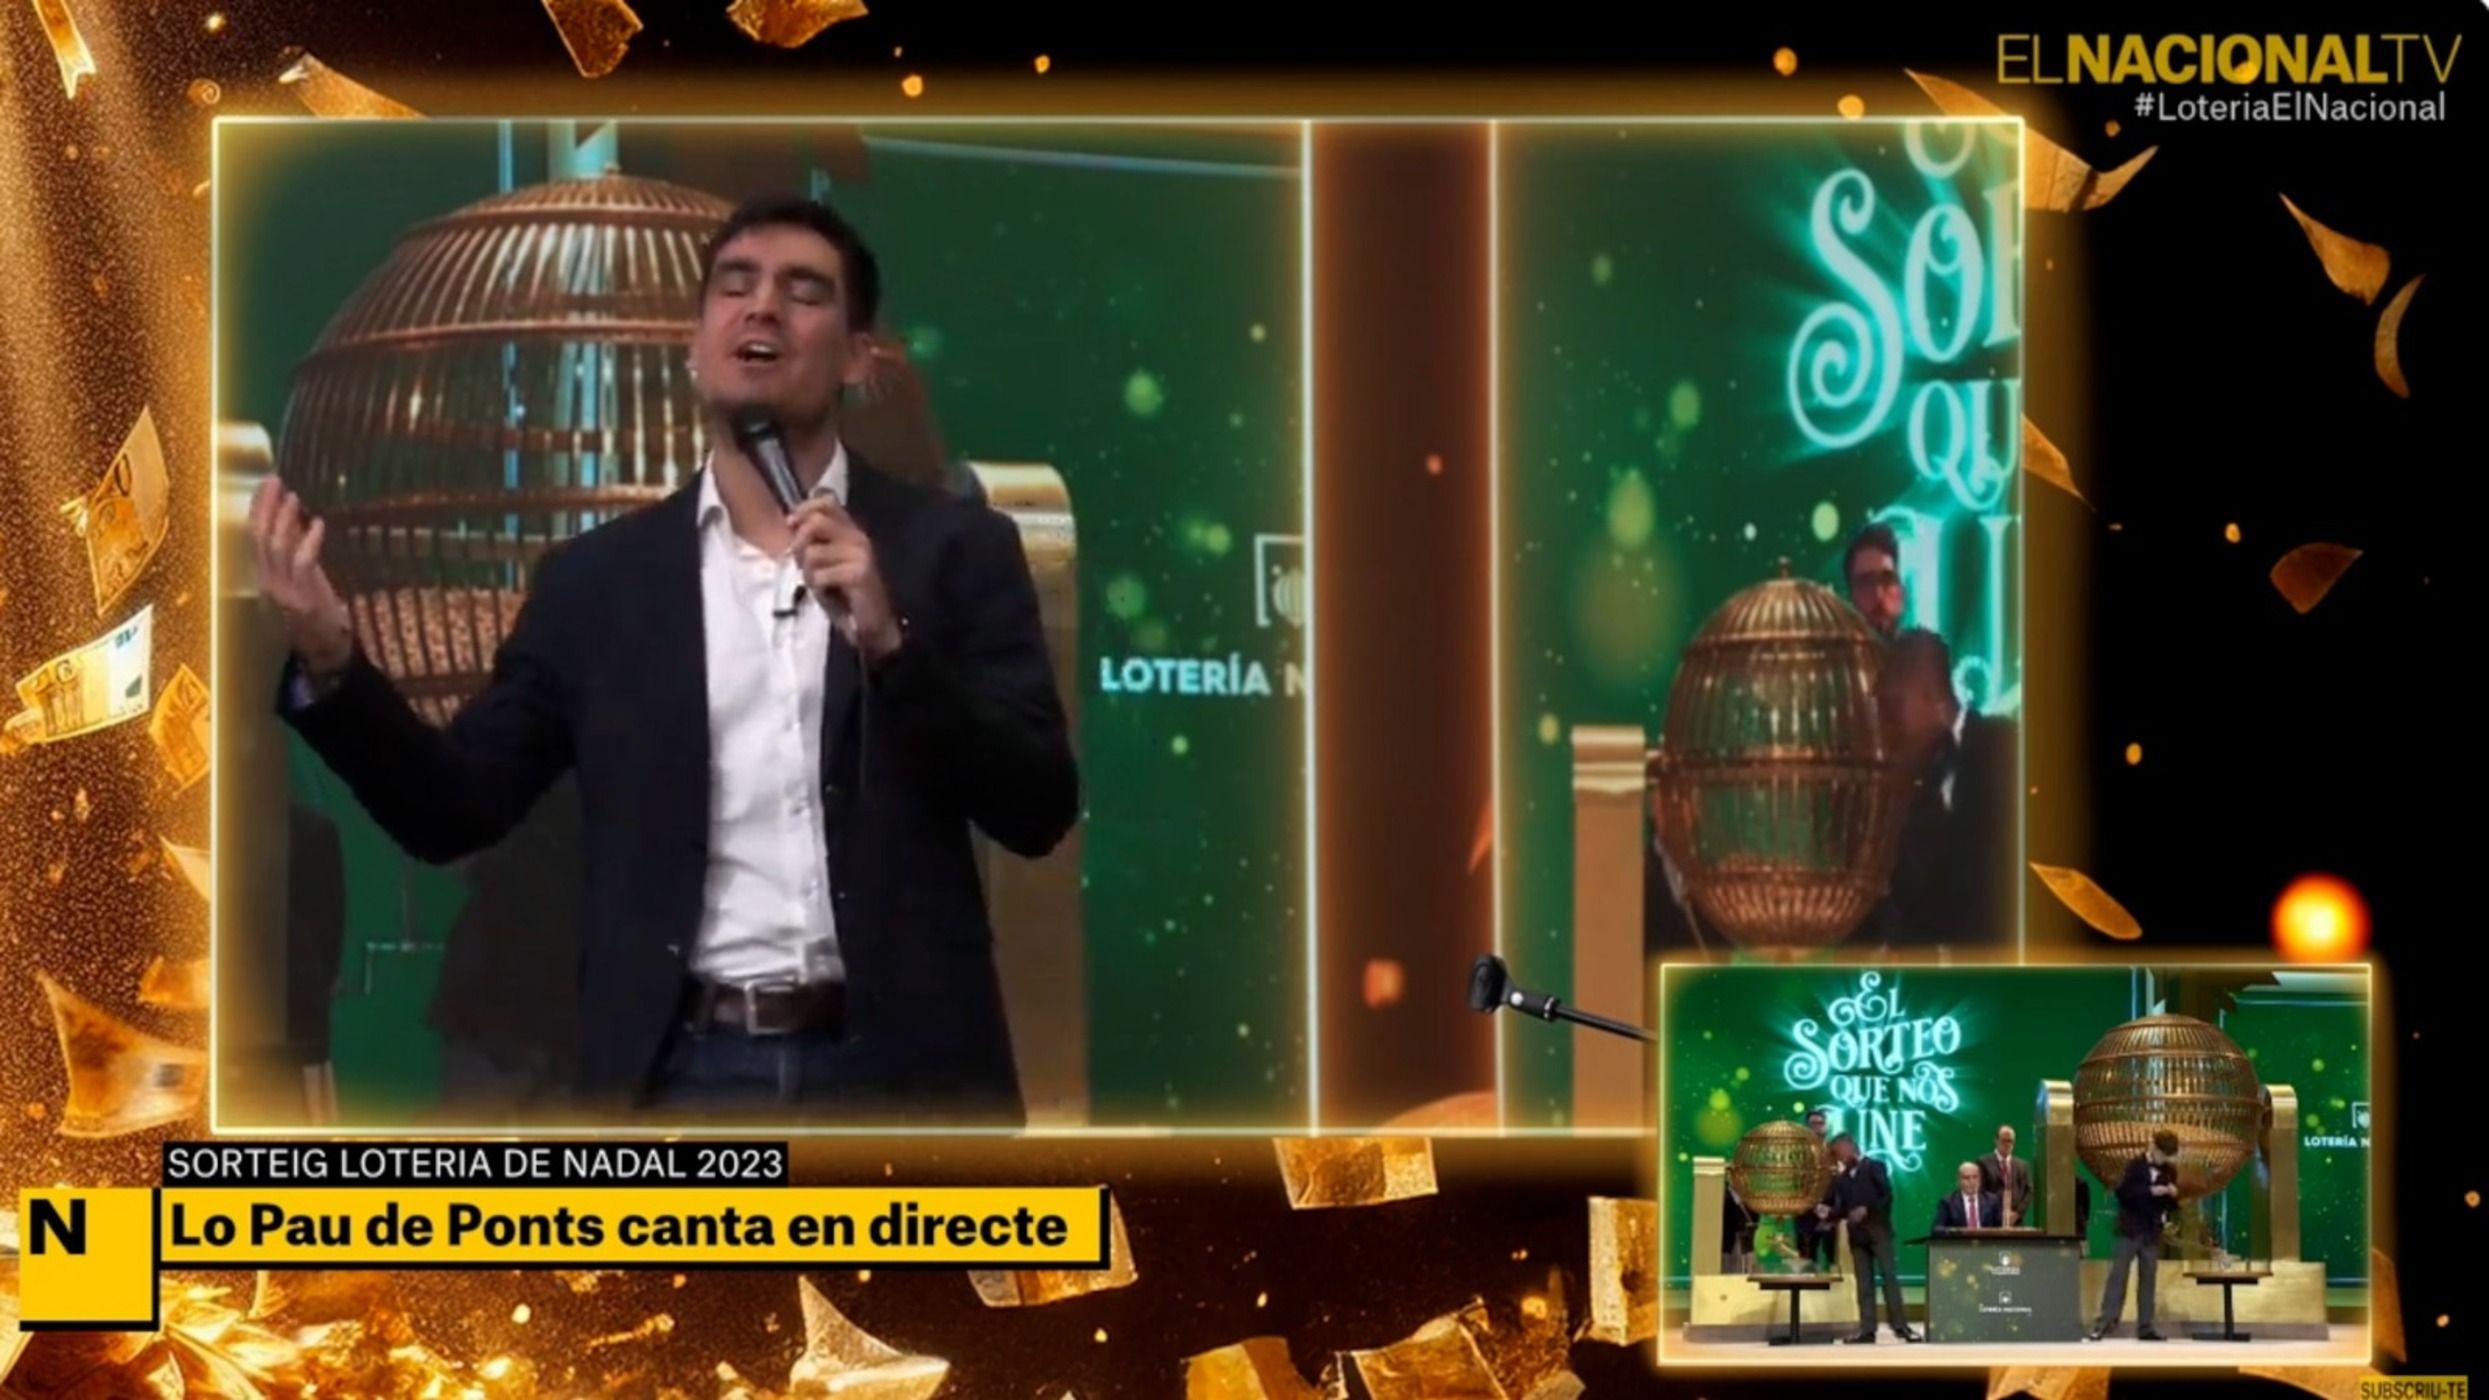 The 2023 news in Catalonia, as sung by Lo Pau de Ponts for El Nacional's lottery special